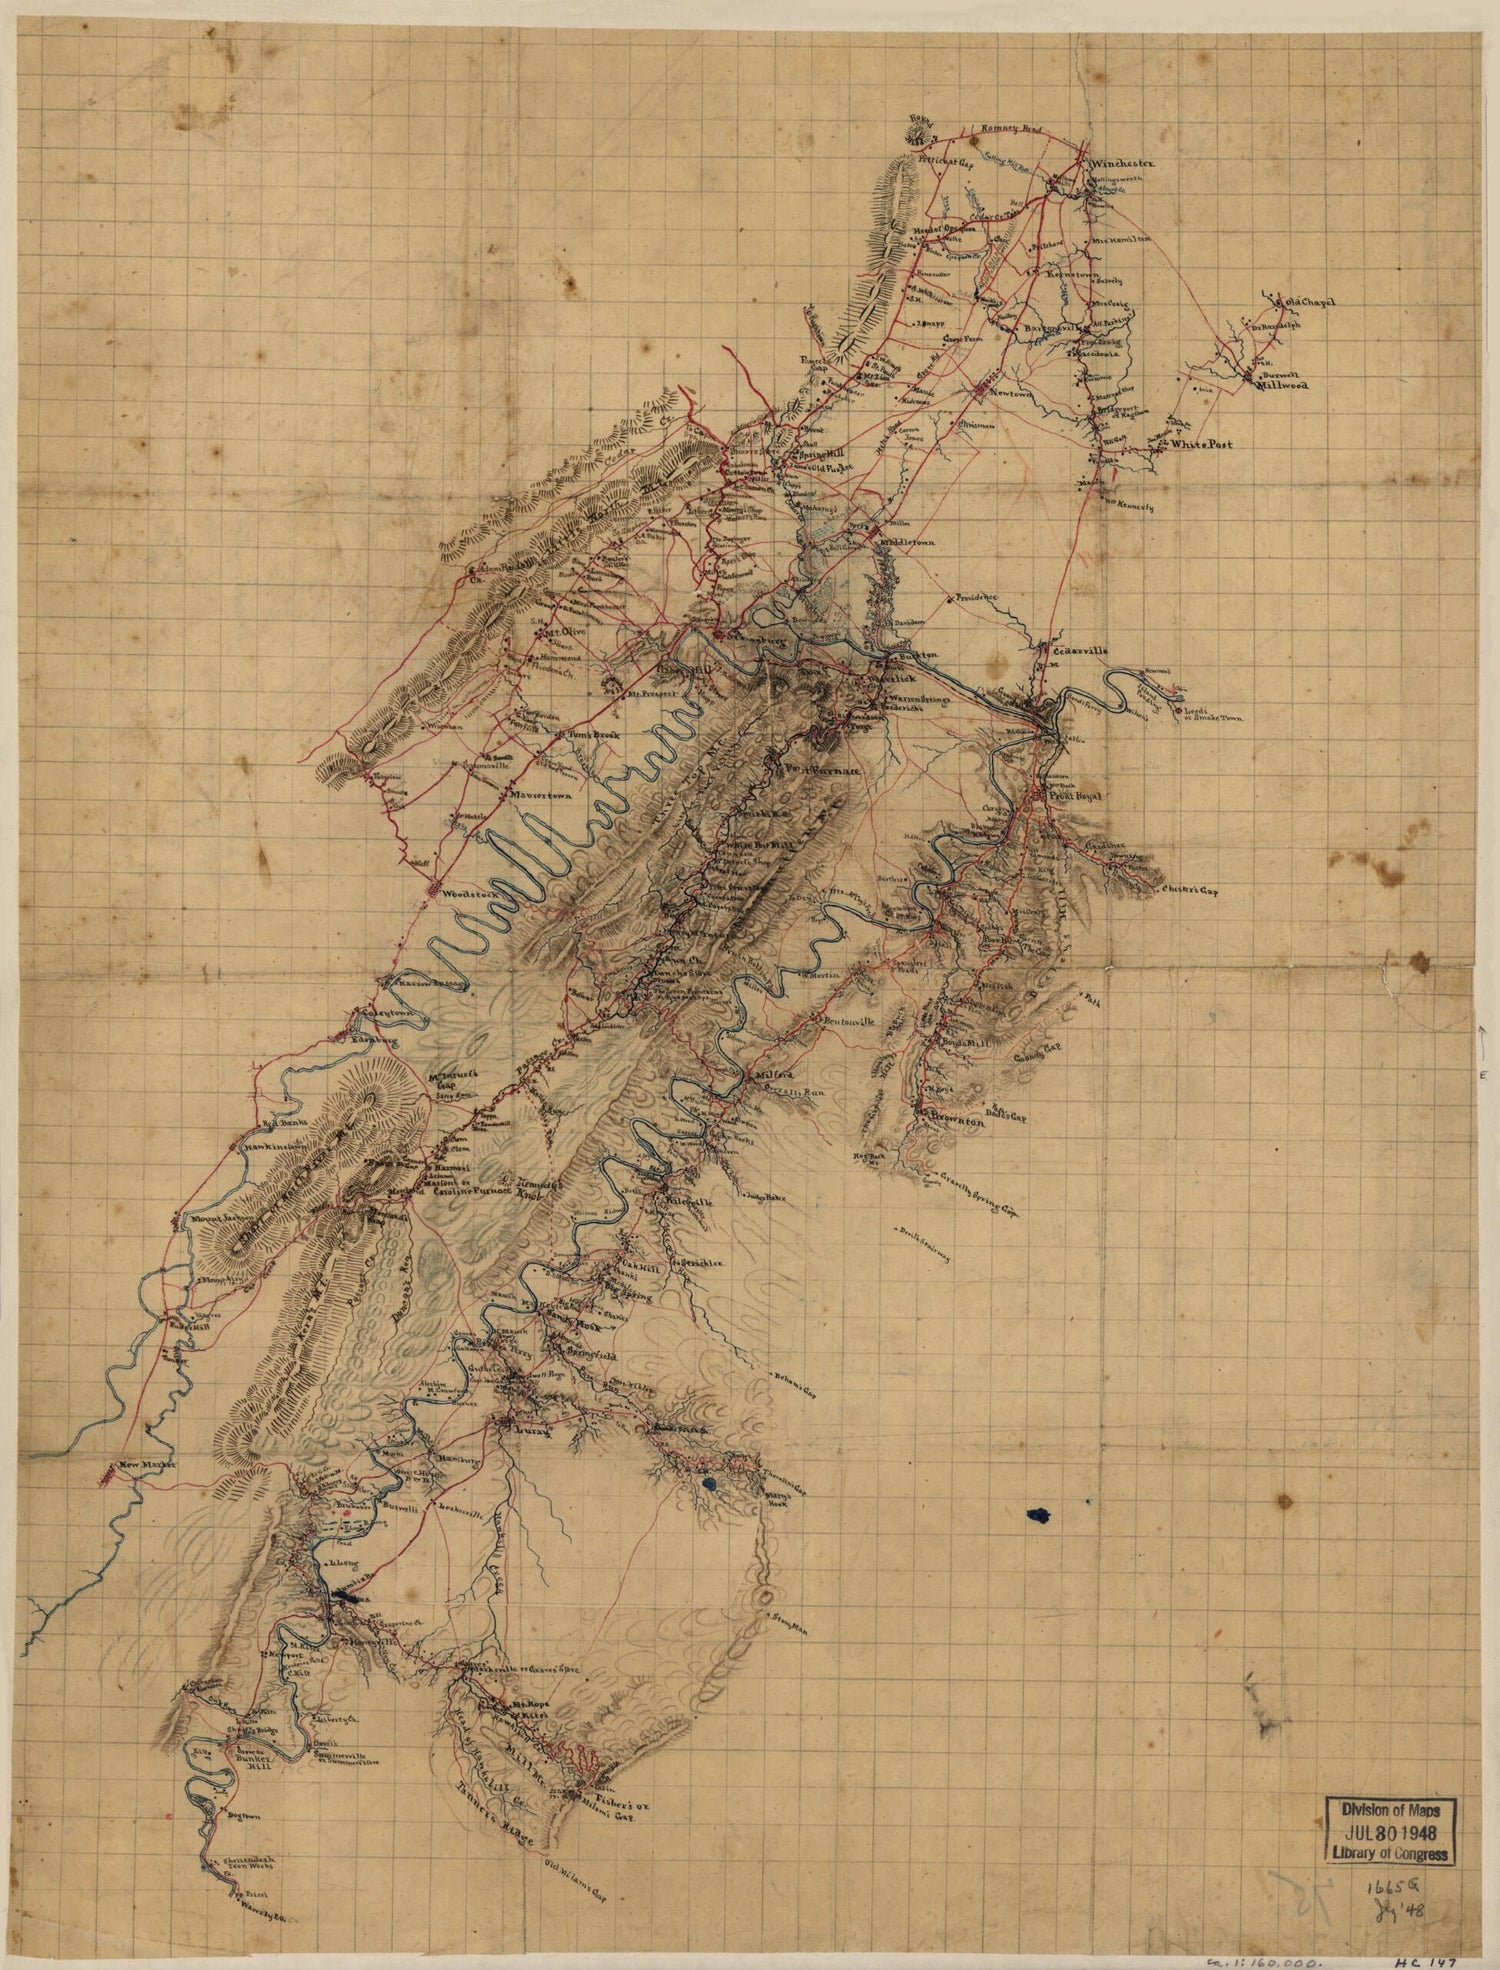 This old map of Map of Shenandoah Valley from Winchester to New Market, Virginia and from Millwood to Waverly P.O., Including Parts of Frederick, Clarke, Warren, Shenandoah, and Page Counties, Virginia from 1860 was created by  in 1860